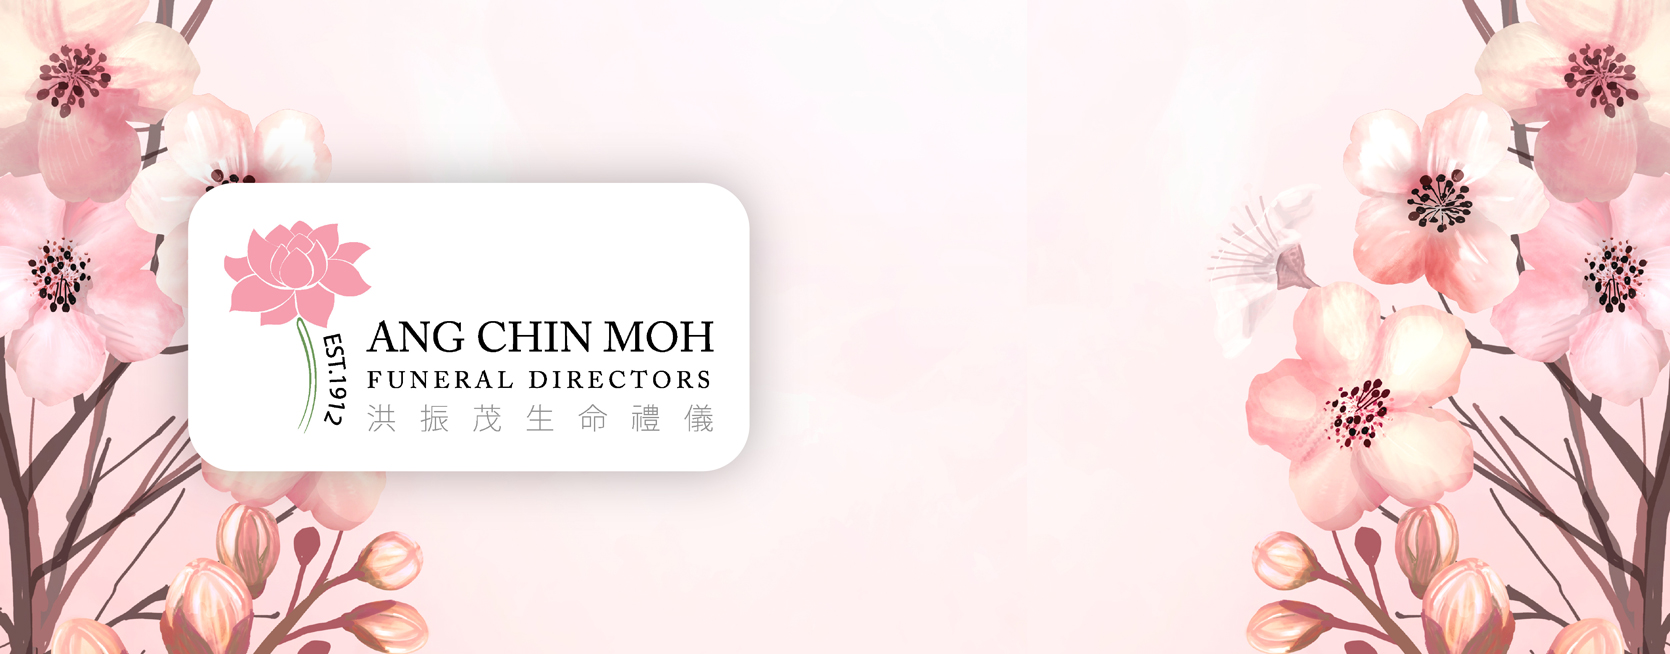 Ang Chin Moh Funeral Directors - Drizzlin